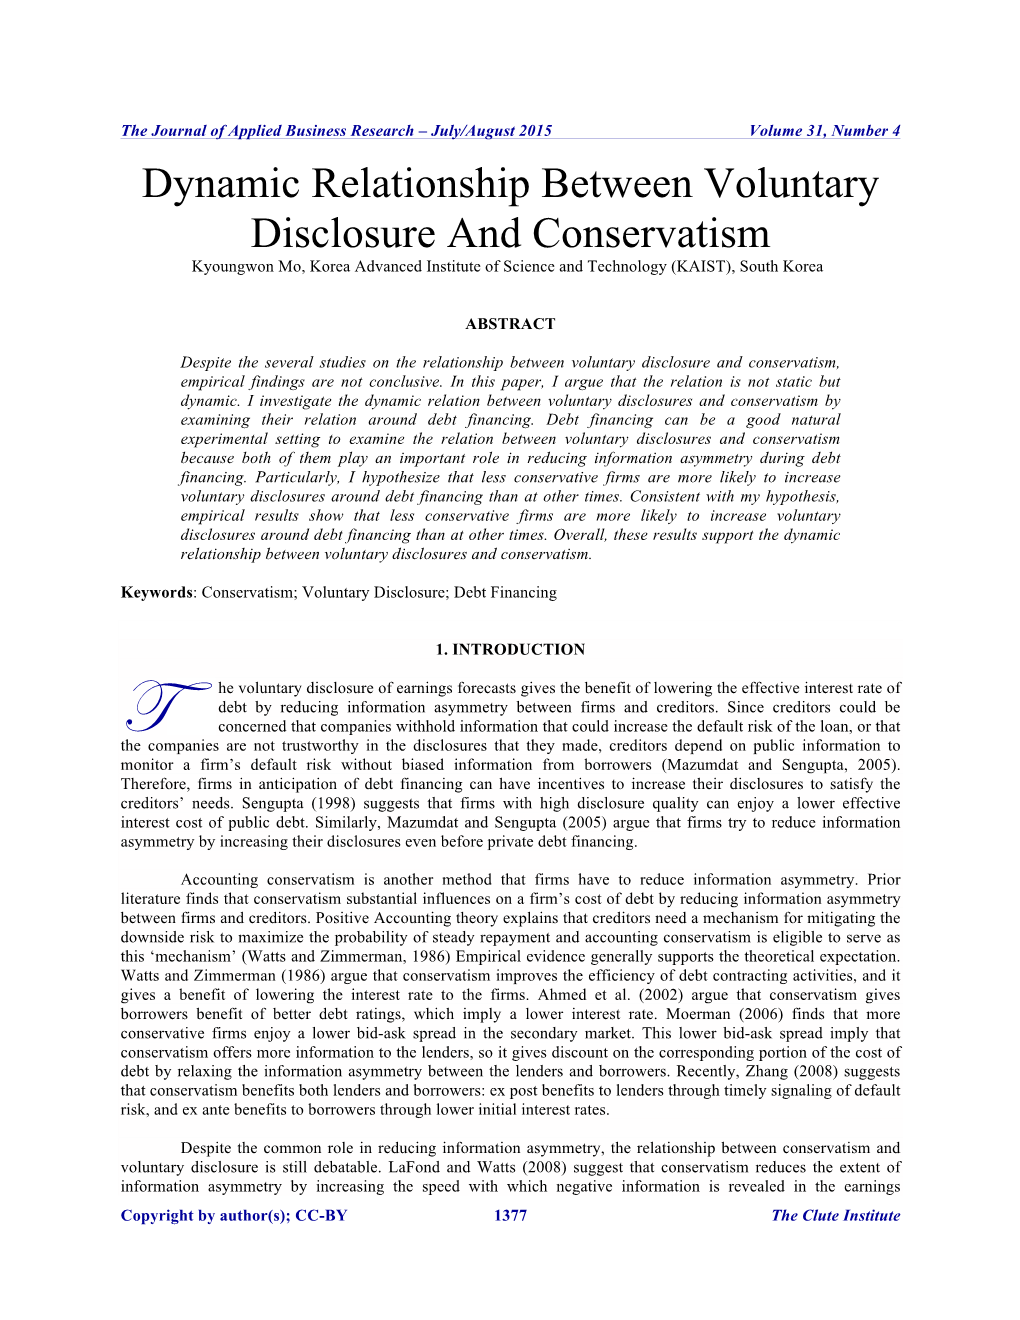 Dynamic Relationship Between Voluntary Disclosure and Conservatism Kyoungwon Mo, Korea Advanced Institute of Science and Technology (KAIST), South Korea